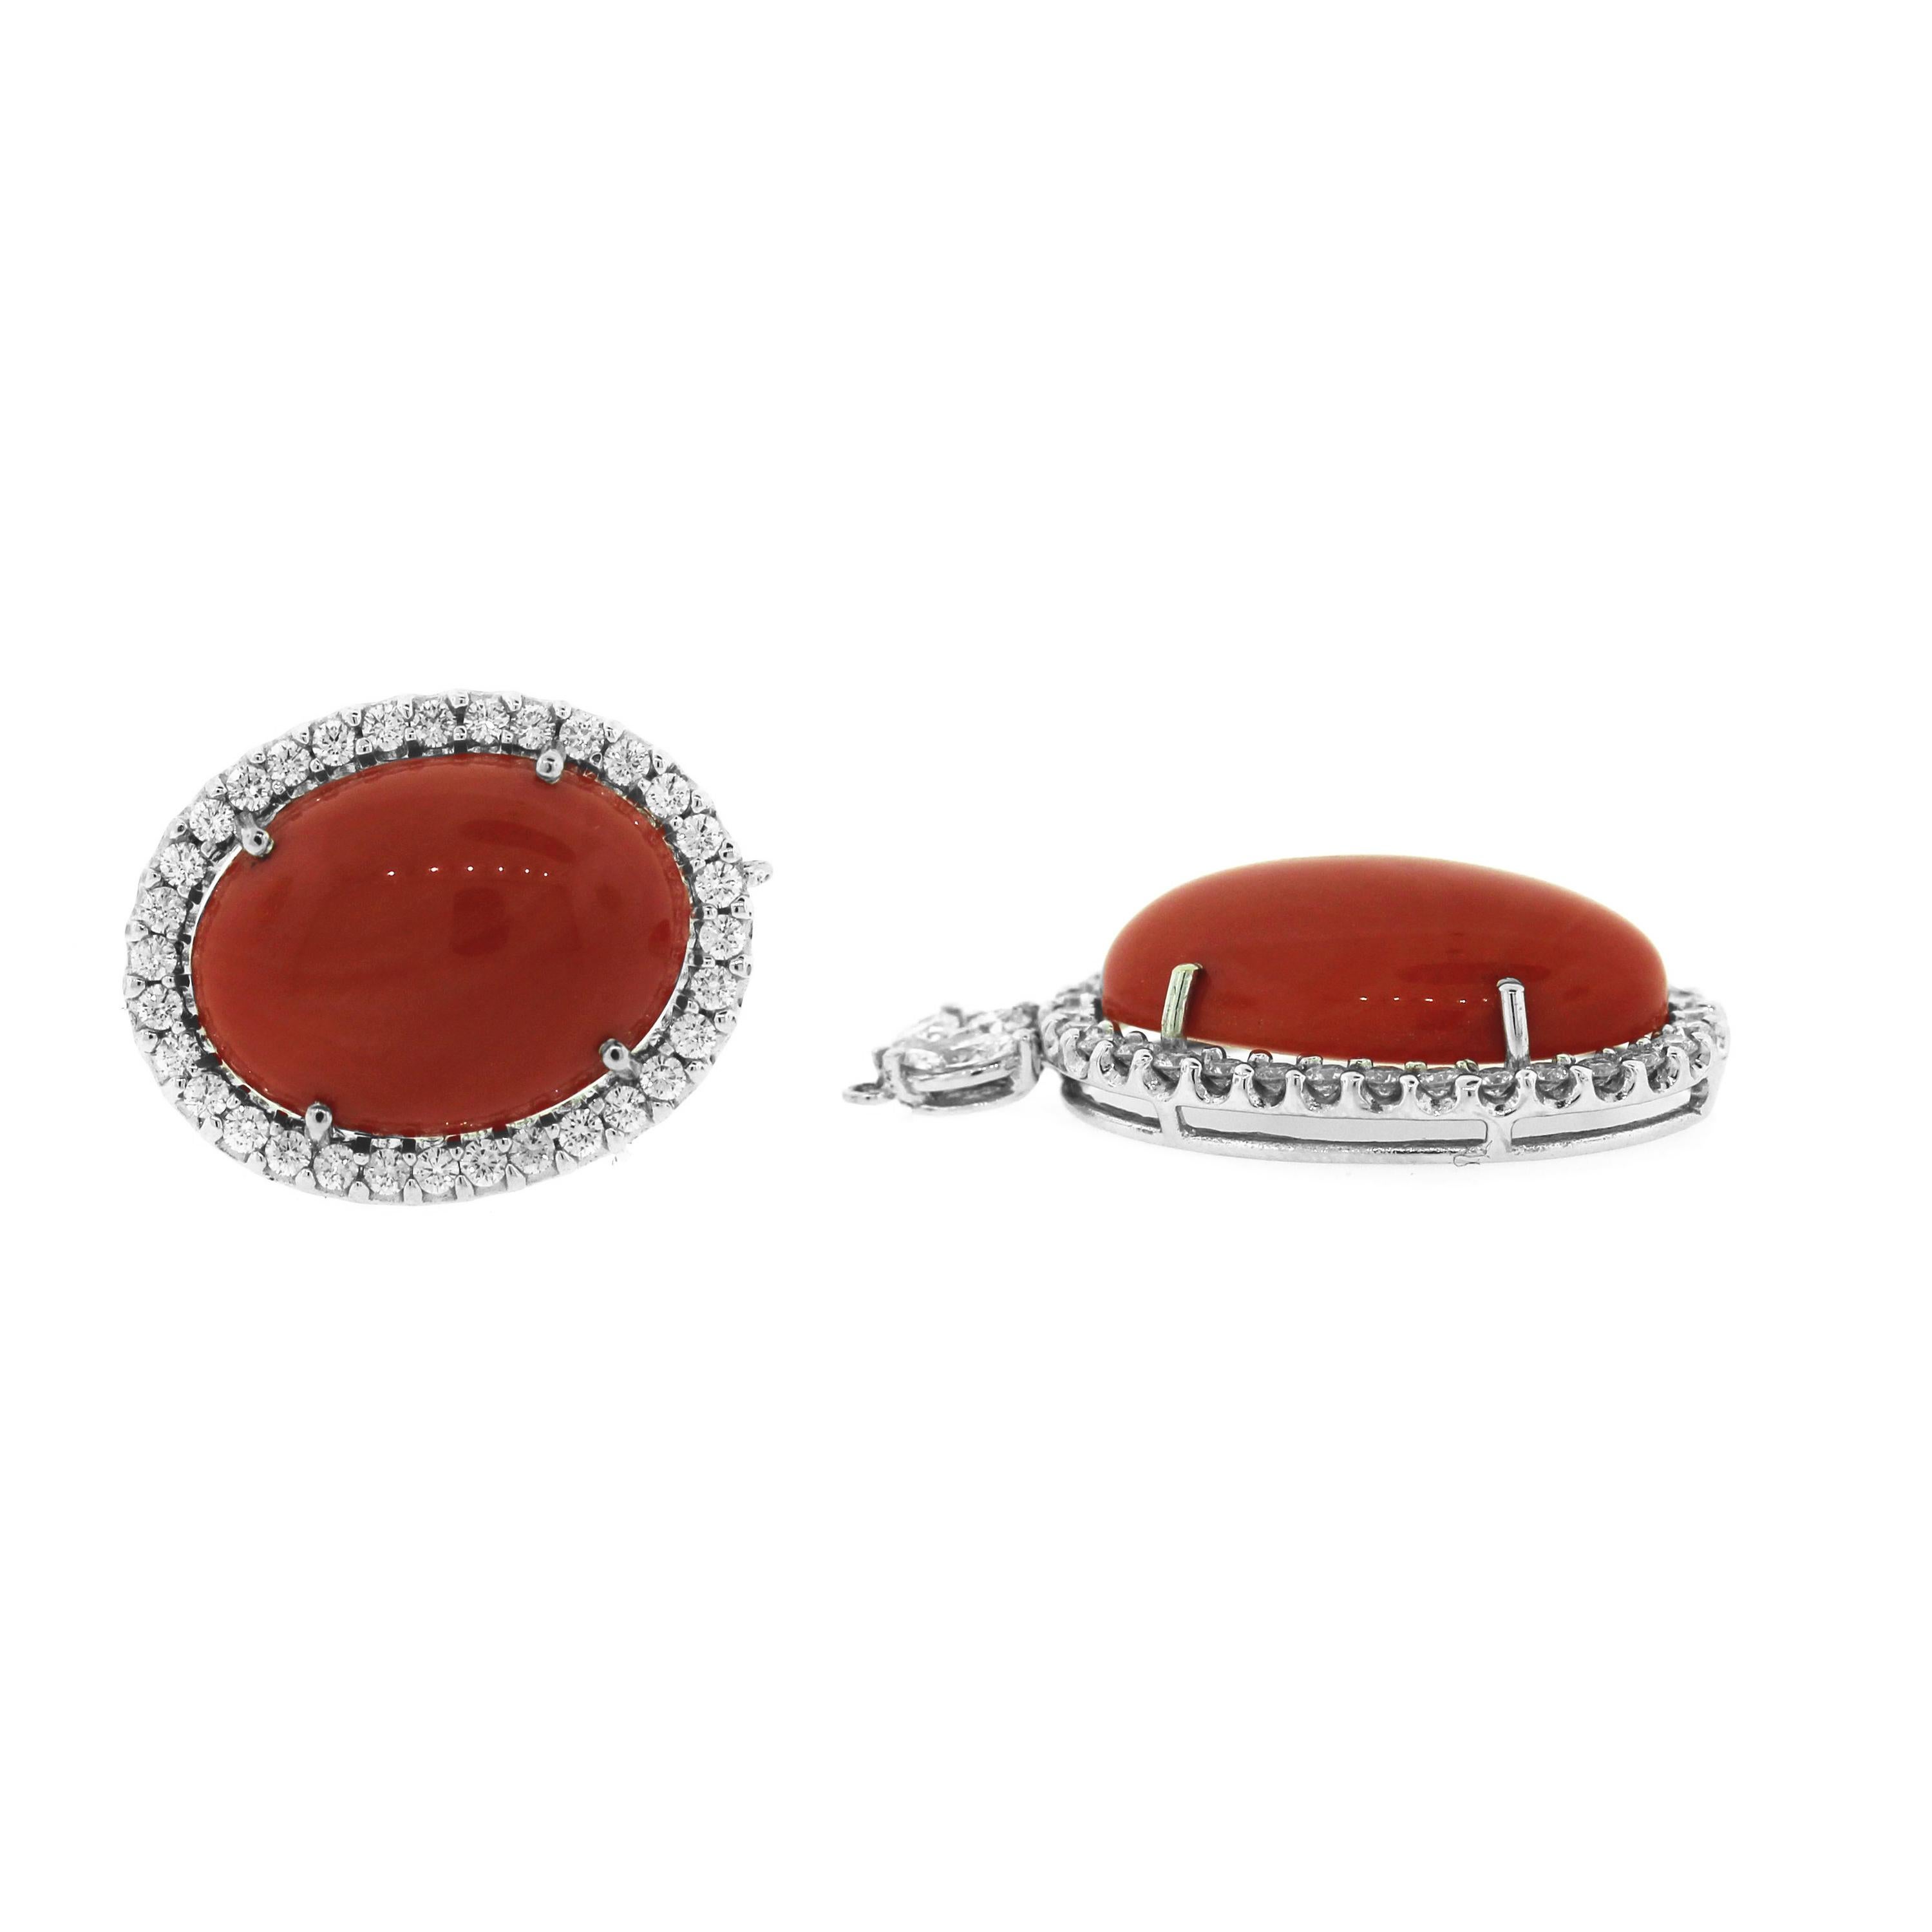 IF YOU ARE REALLY INTERESTED, CONTACT US WITH ANY REASONABLE OFFER. WE WILL TRY OUR BEST TO MAKE YOU HAPPY!

18k White Gold Earrings with 4 Italian Red Corals and Diamonds

Apprx. 40 carats of Italian Coral on this pair. Gorgeous red color.

6.75ct.